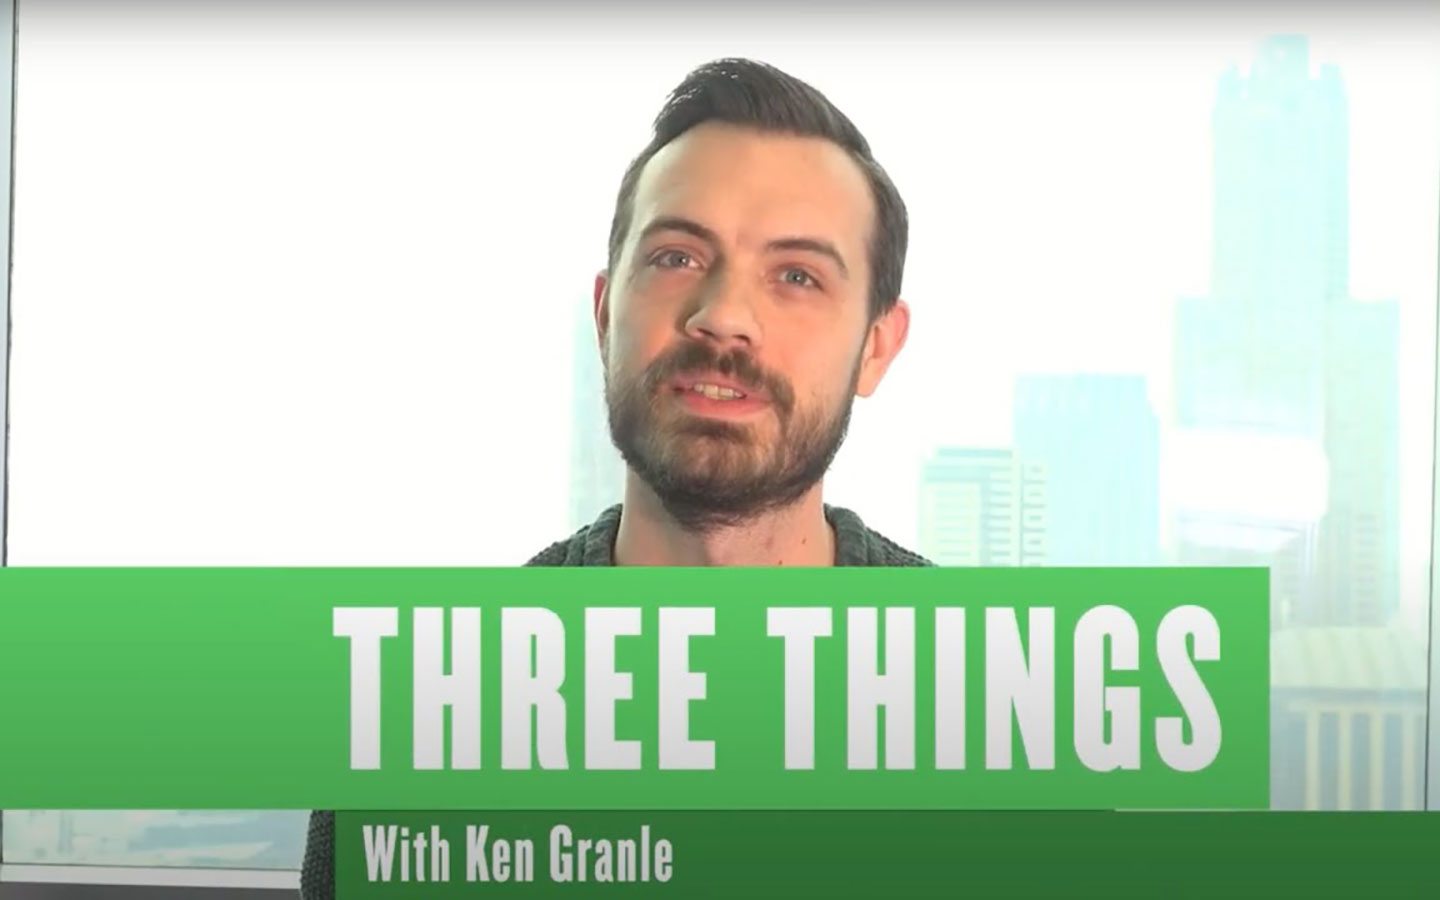 Still from video interview with caption "Three things with Ken Granle"